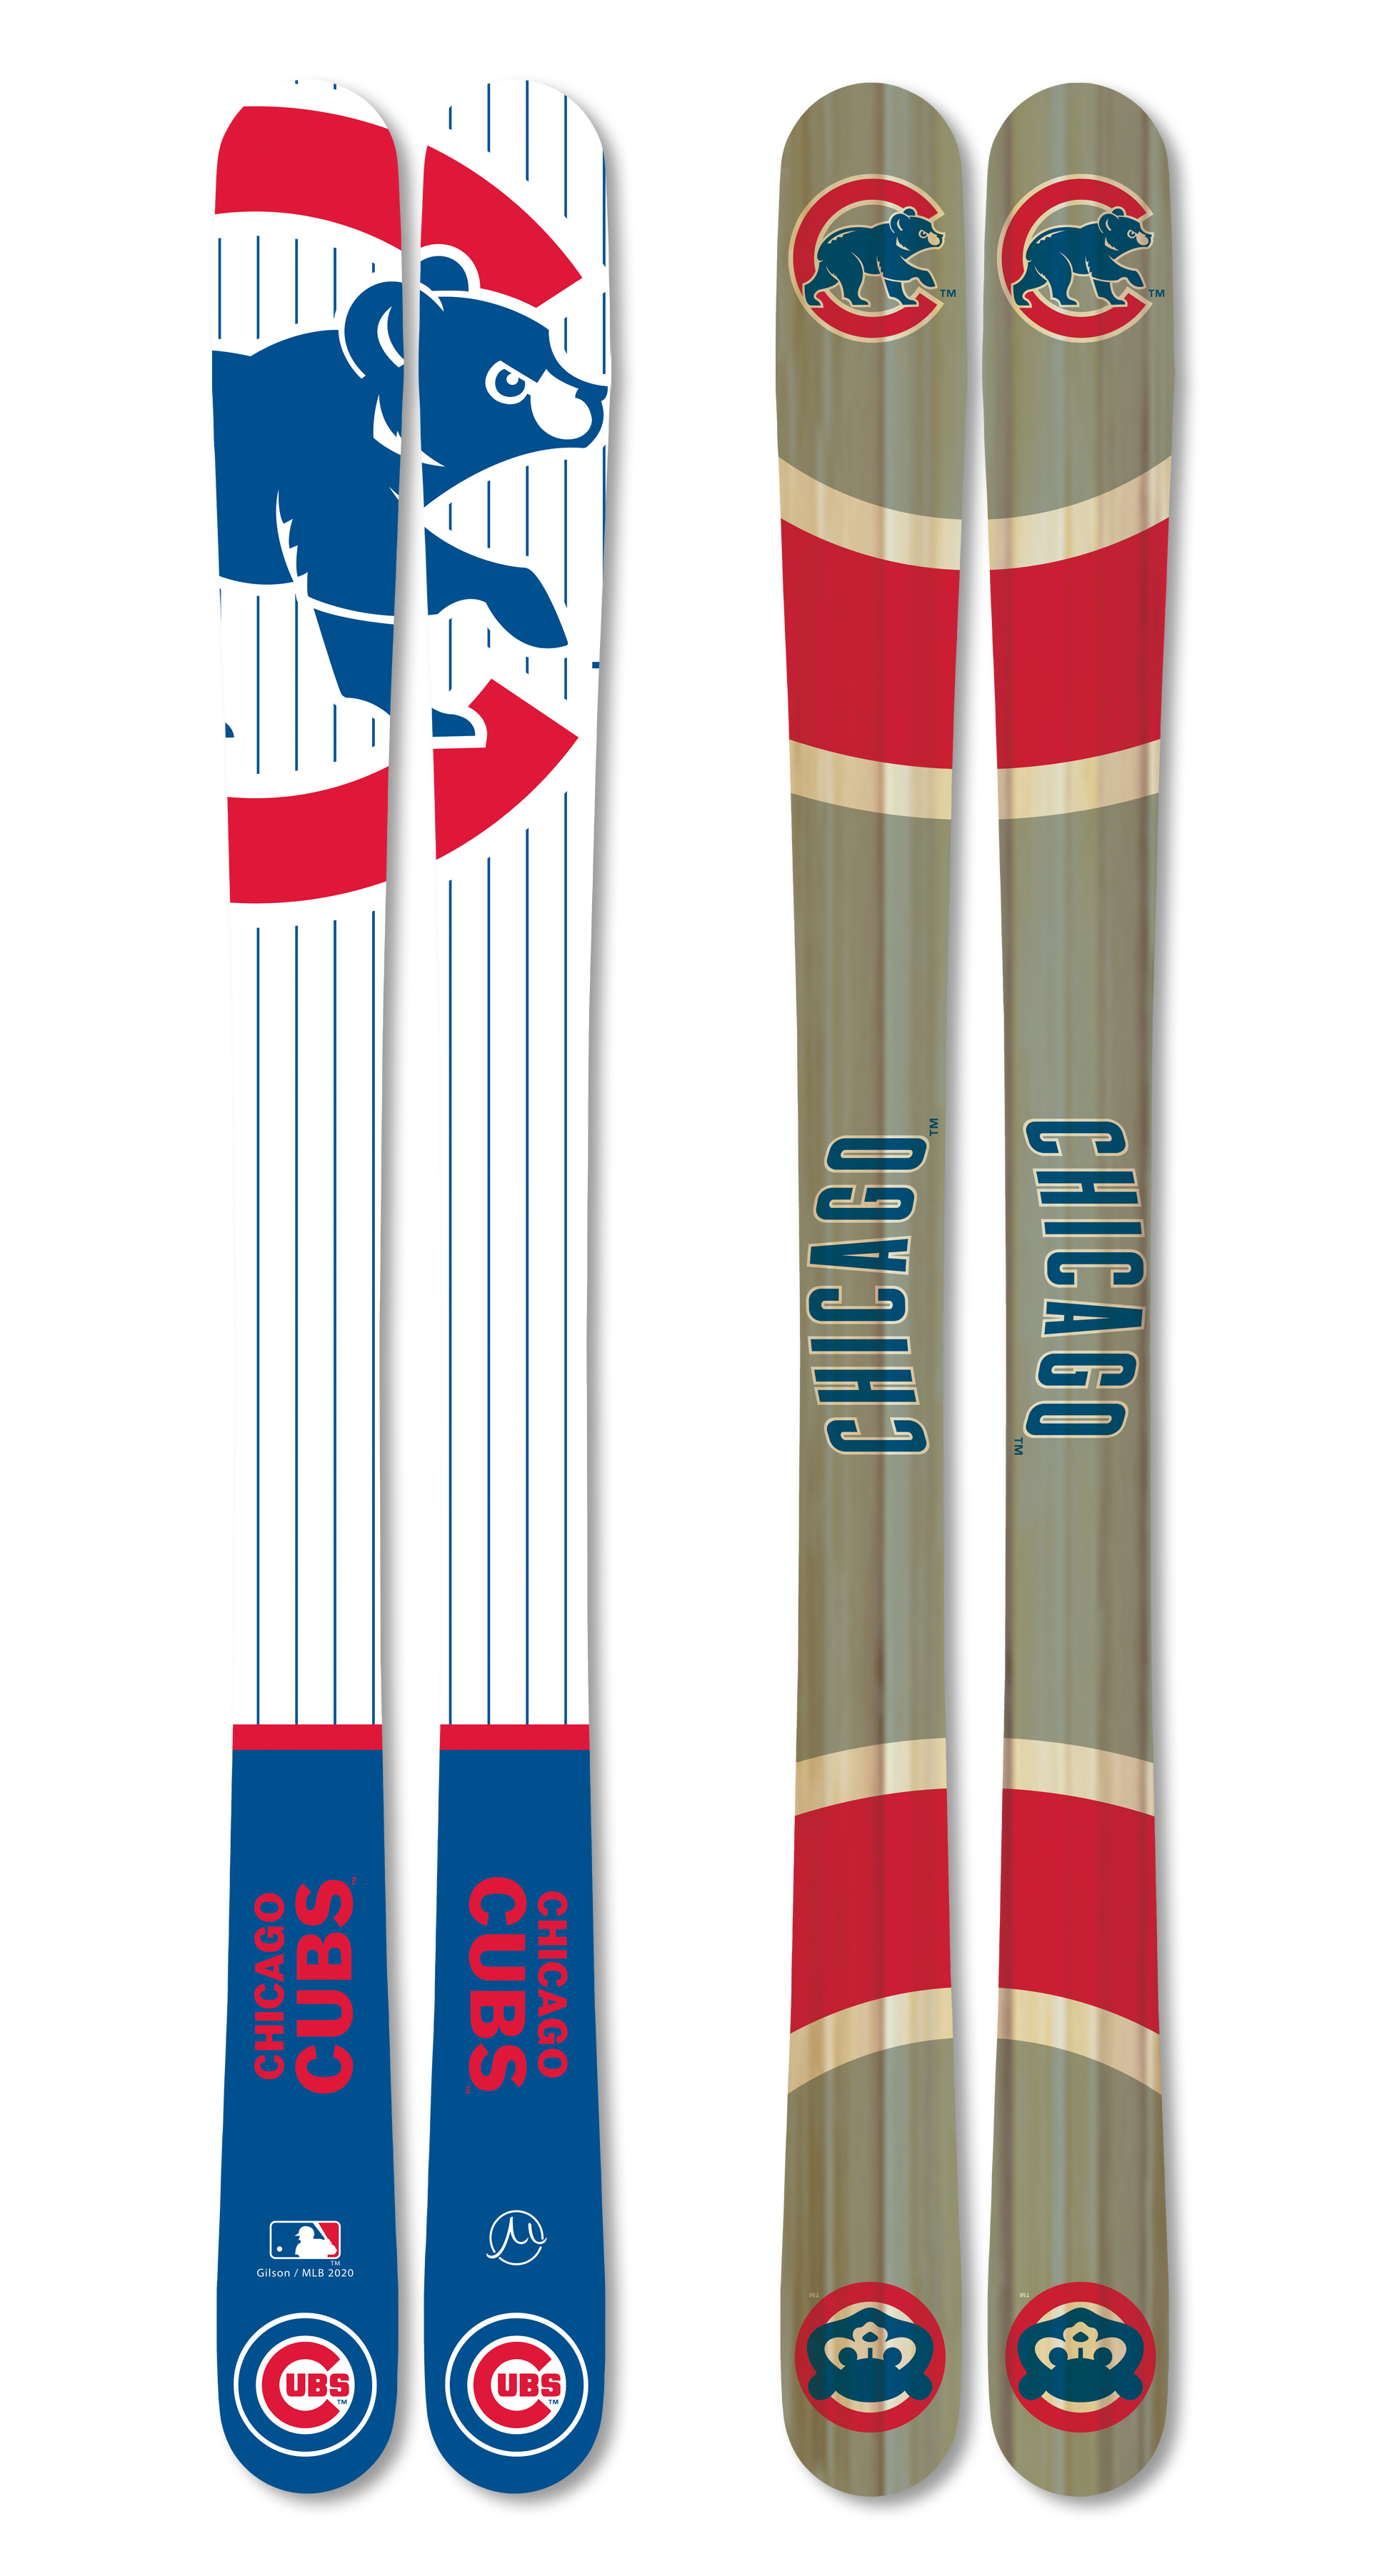 Mlb chicago cubs skis large